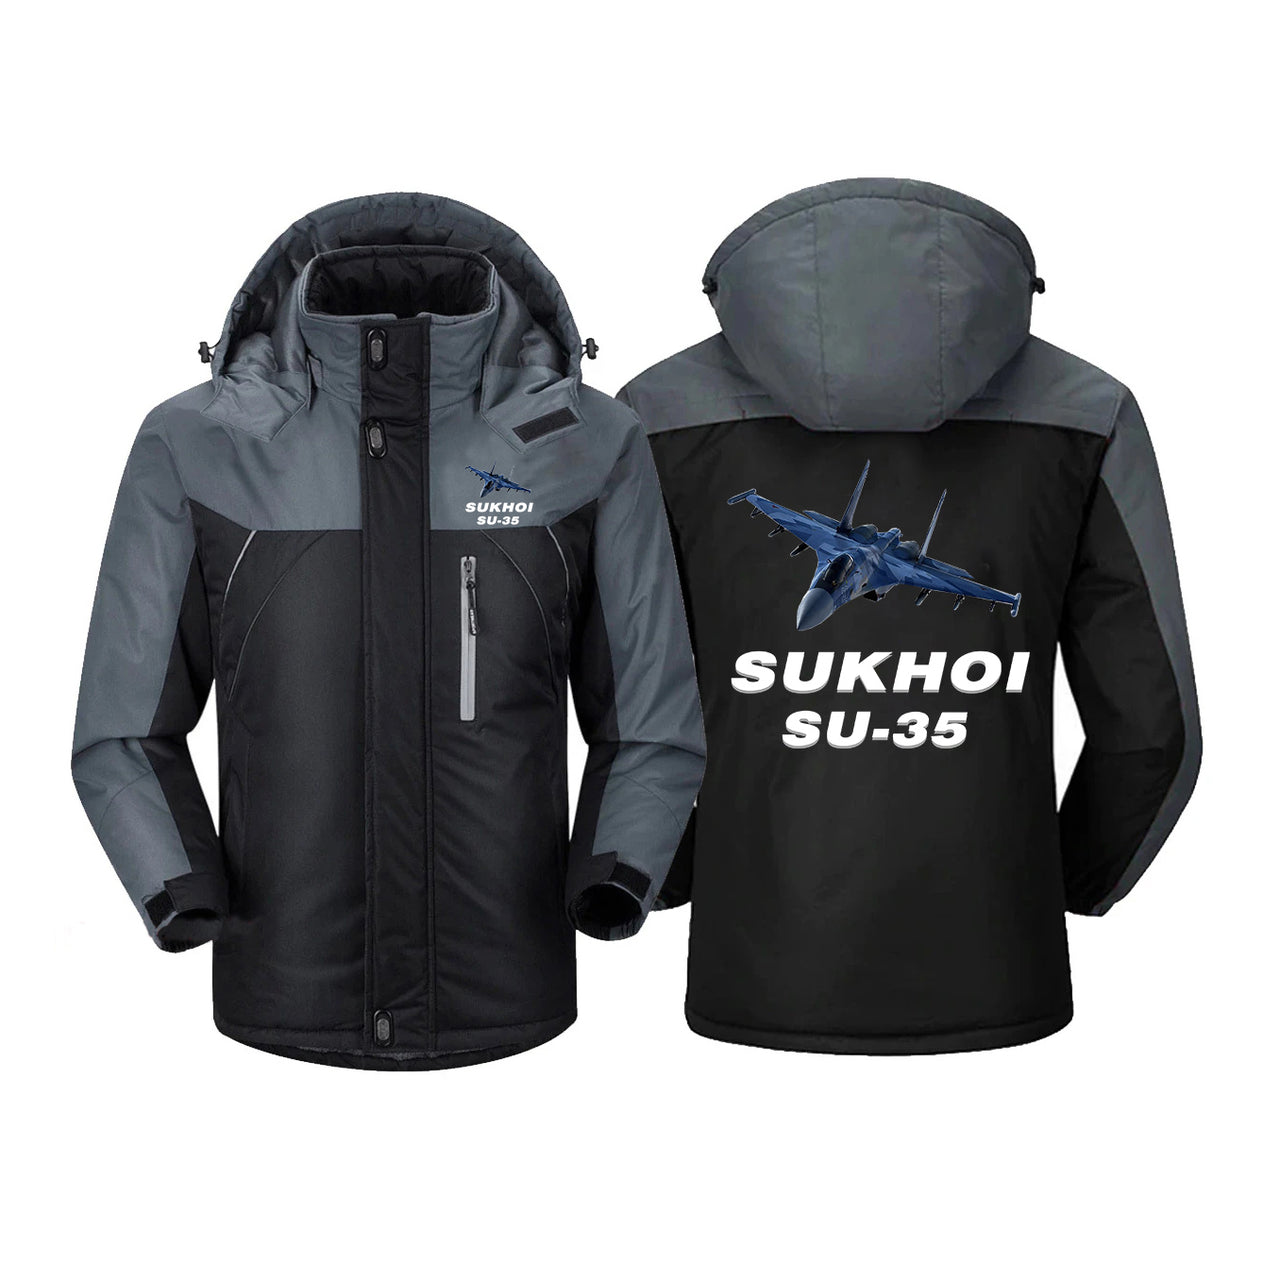 The Sukhoi SU-35 Designed Thick Winter Jackets